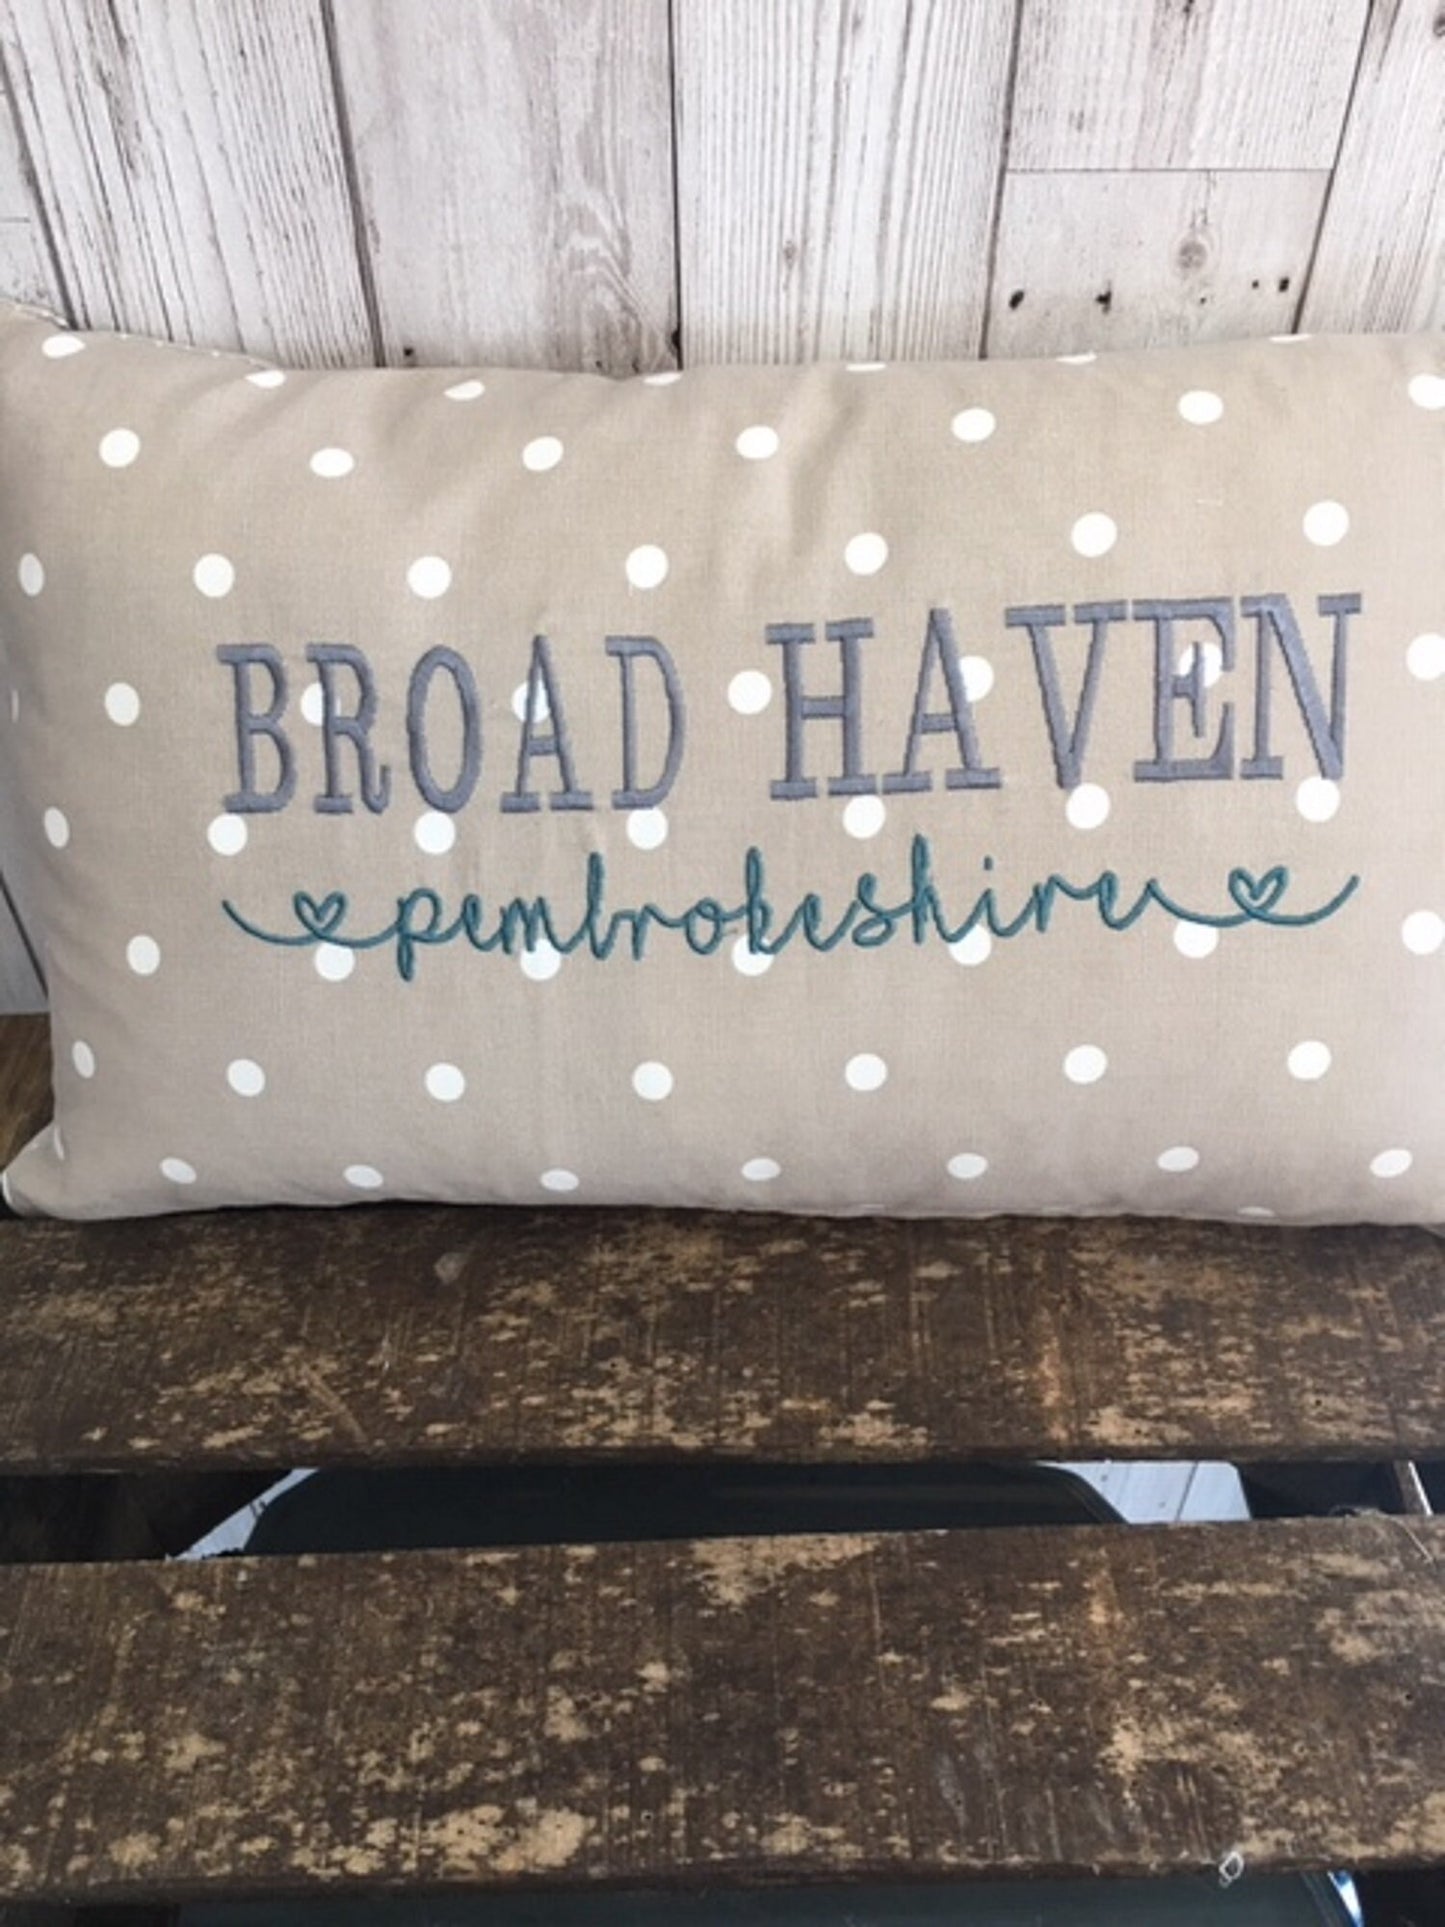 Tenby -Pembrokeshire- Location cushion 20" x 12" Cushion Cover Taupe Dotty and Sea Shell staycation -Nautical cover embroidered